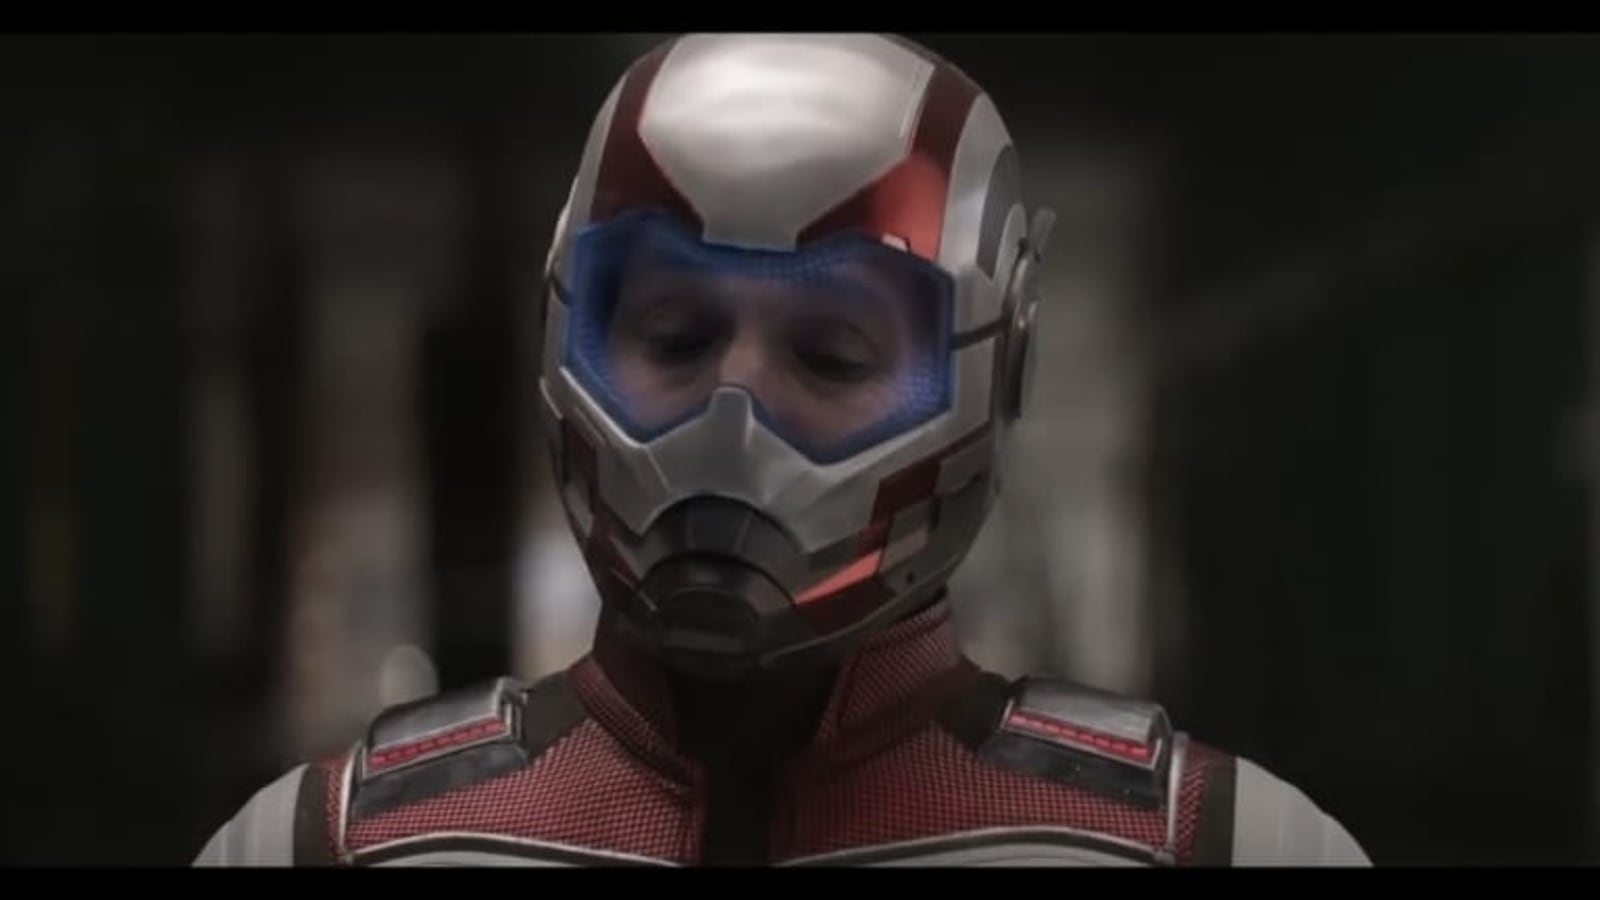 Ant Man and the Wasp: Quantamania Ott Release: Ant-Man and the Wasp:  Quantamania — Here's when Paul Rudd's new movie stream on OTT - The  Economic Times